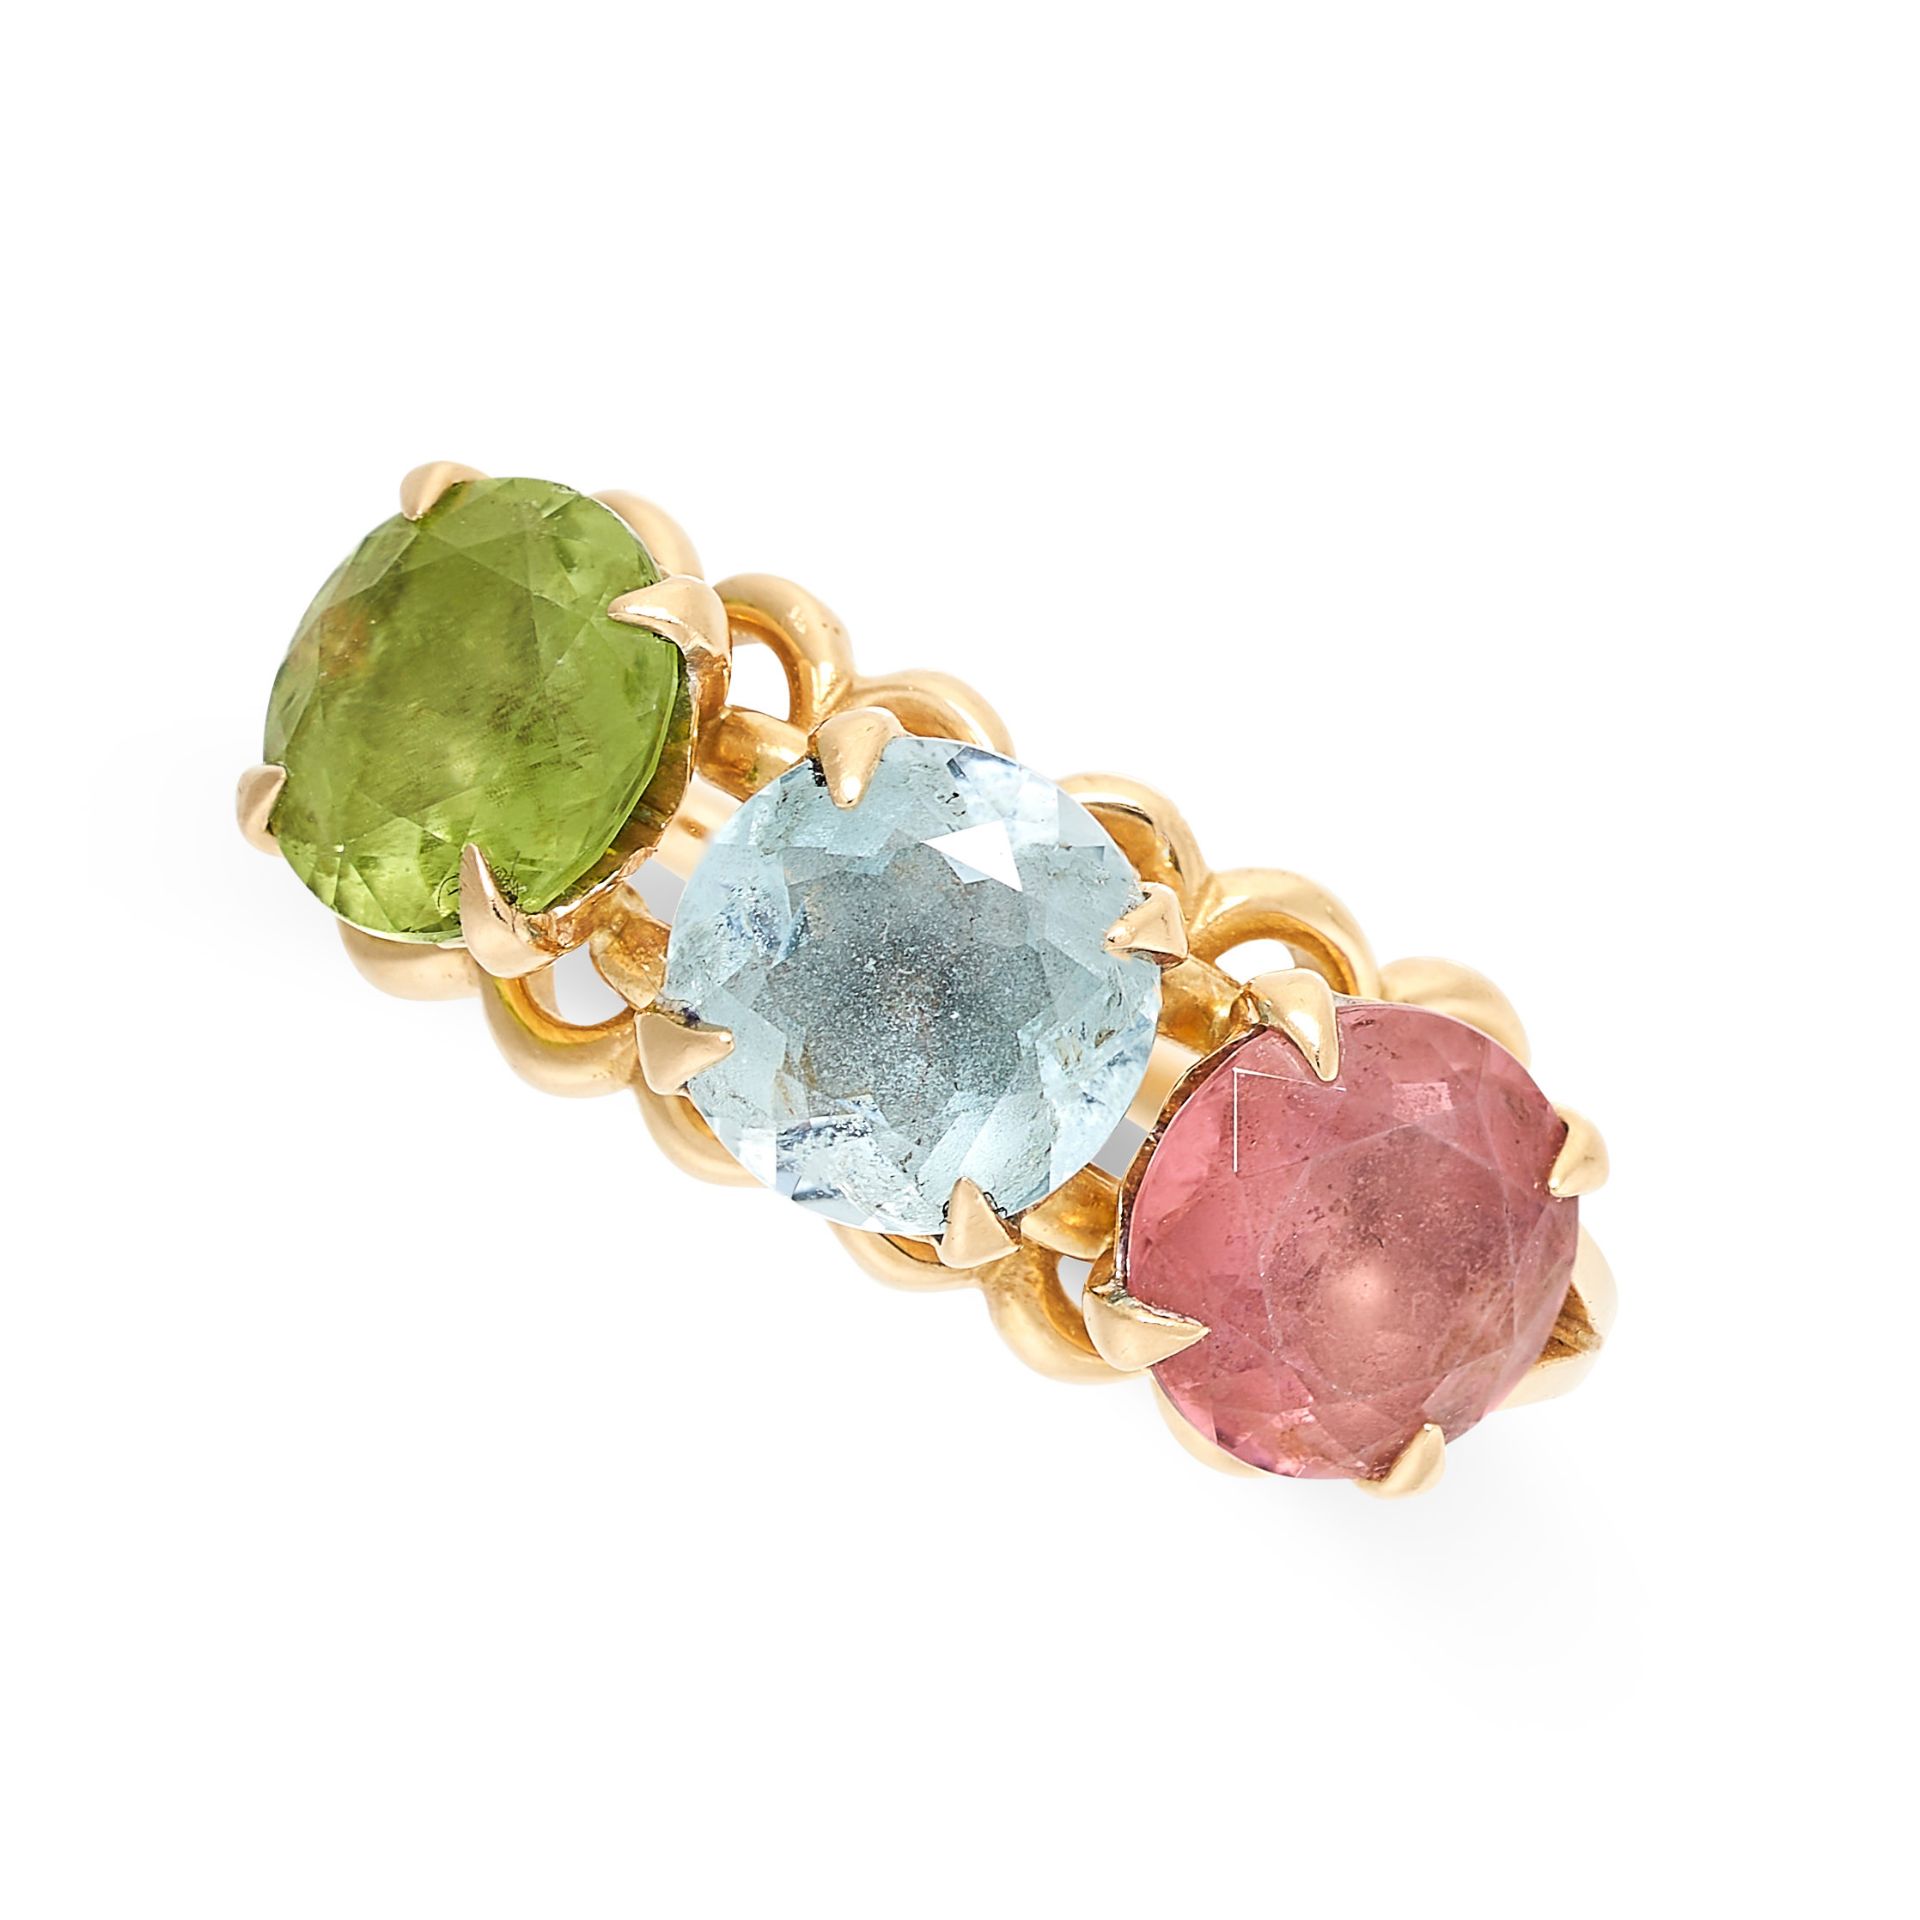 DIOR, A TOURMALINE, TOPAZ AND PERIDOT RING in 18ct yellow gold, set with a round cut pink